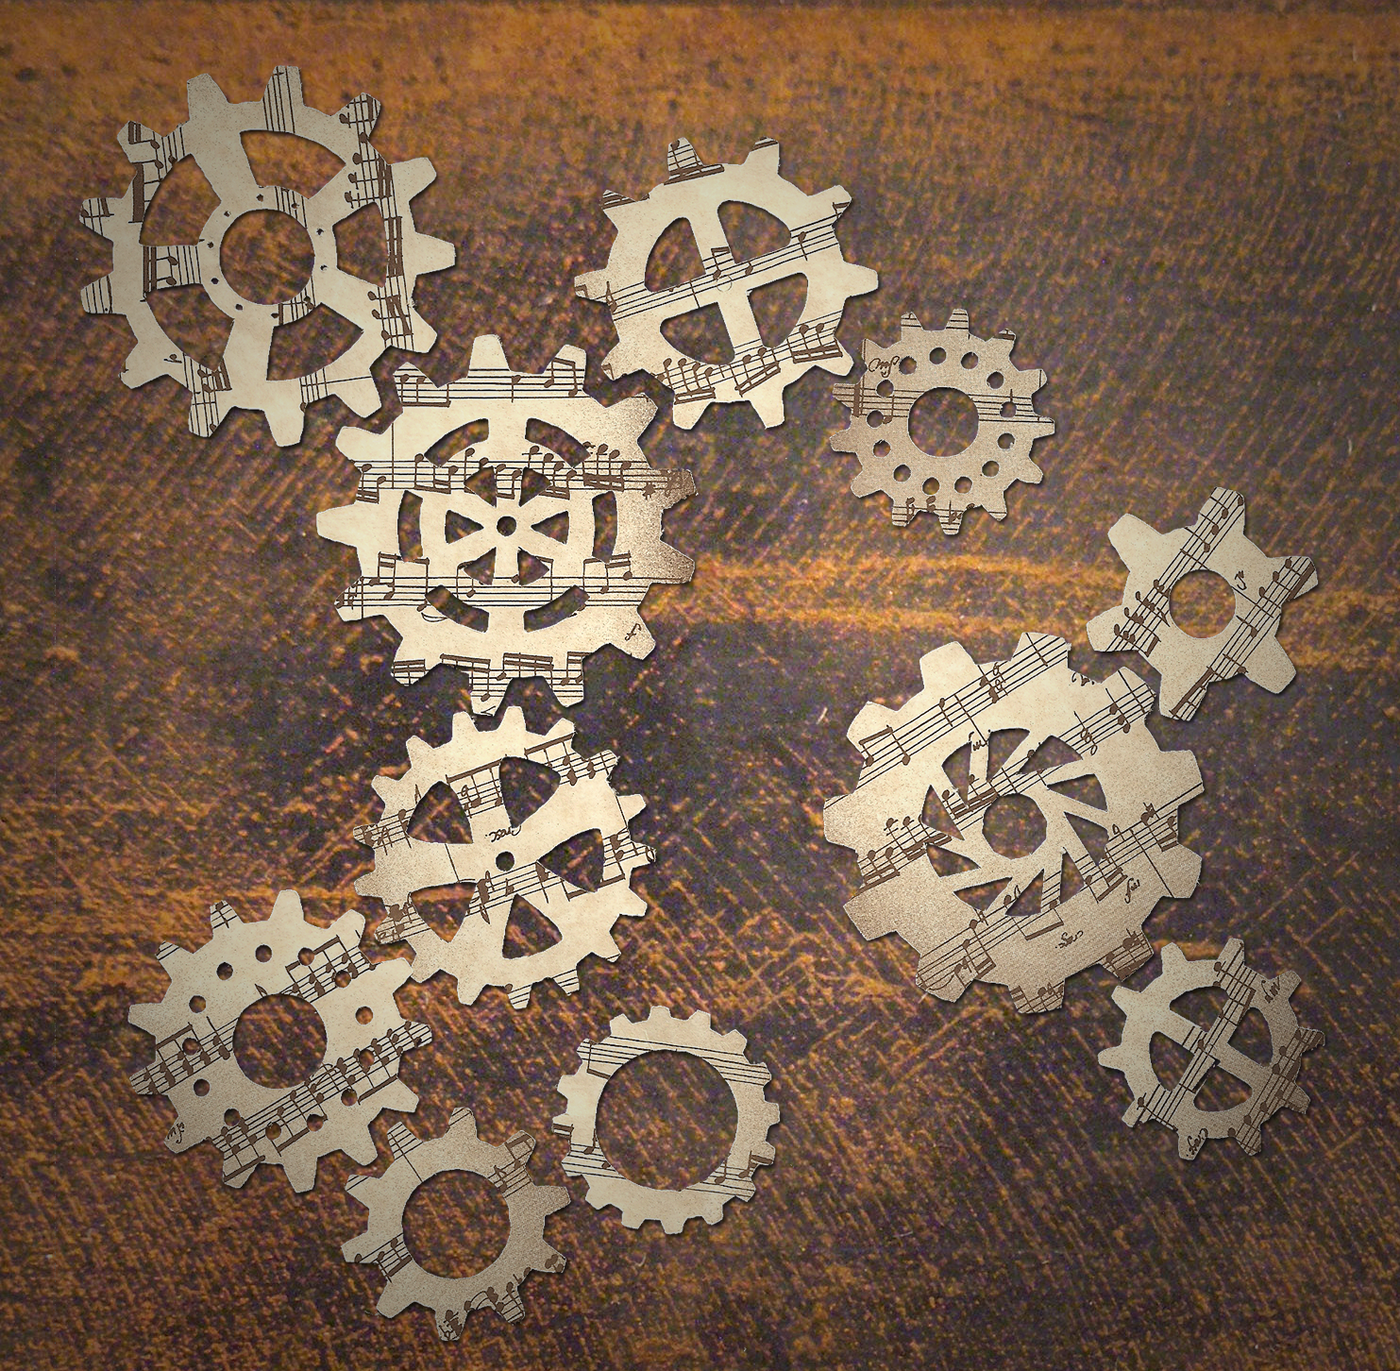 An assortment of paper gears in different shapes.